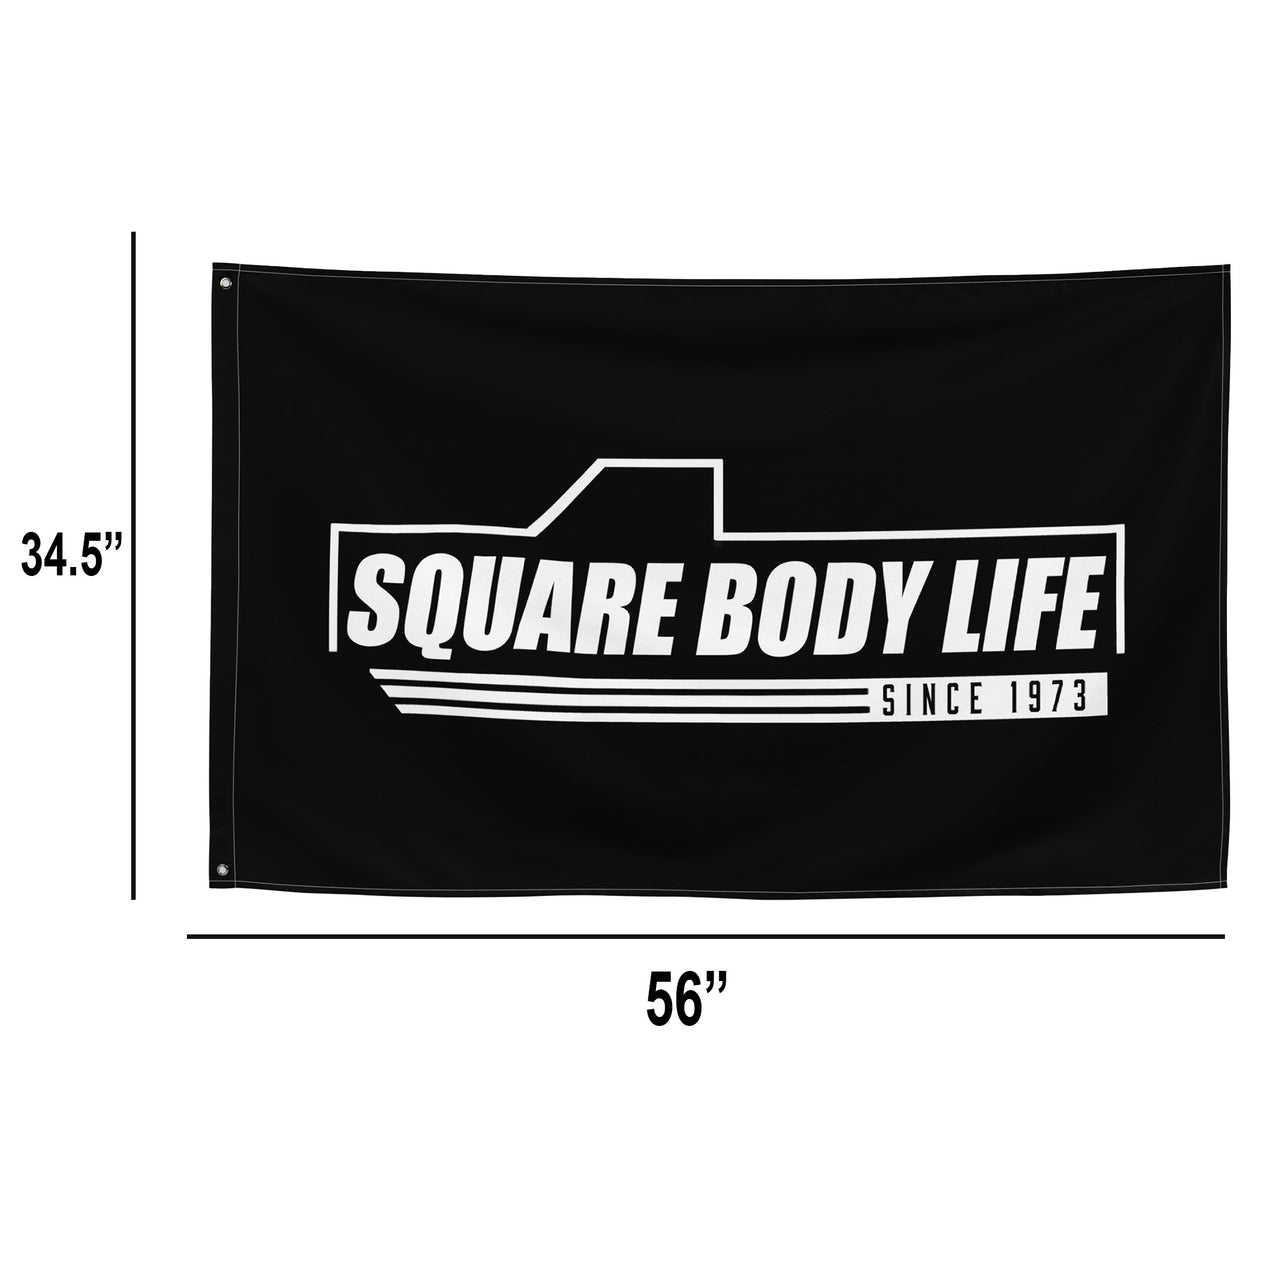 Square body Life Flag with dimensions